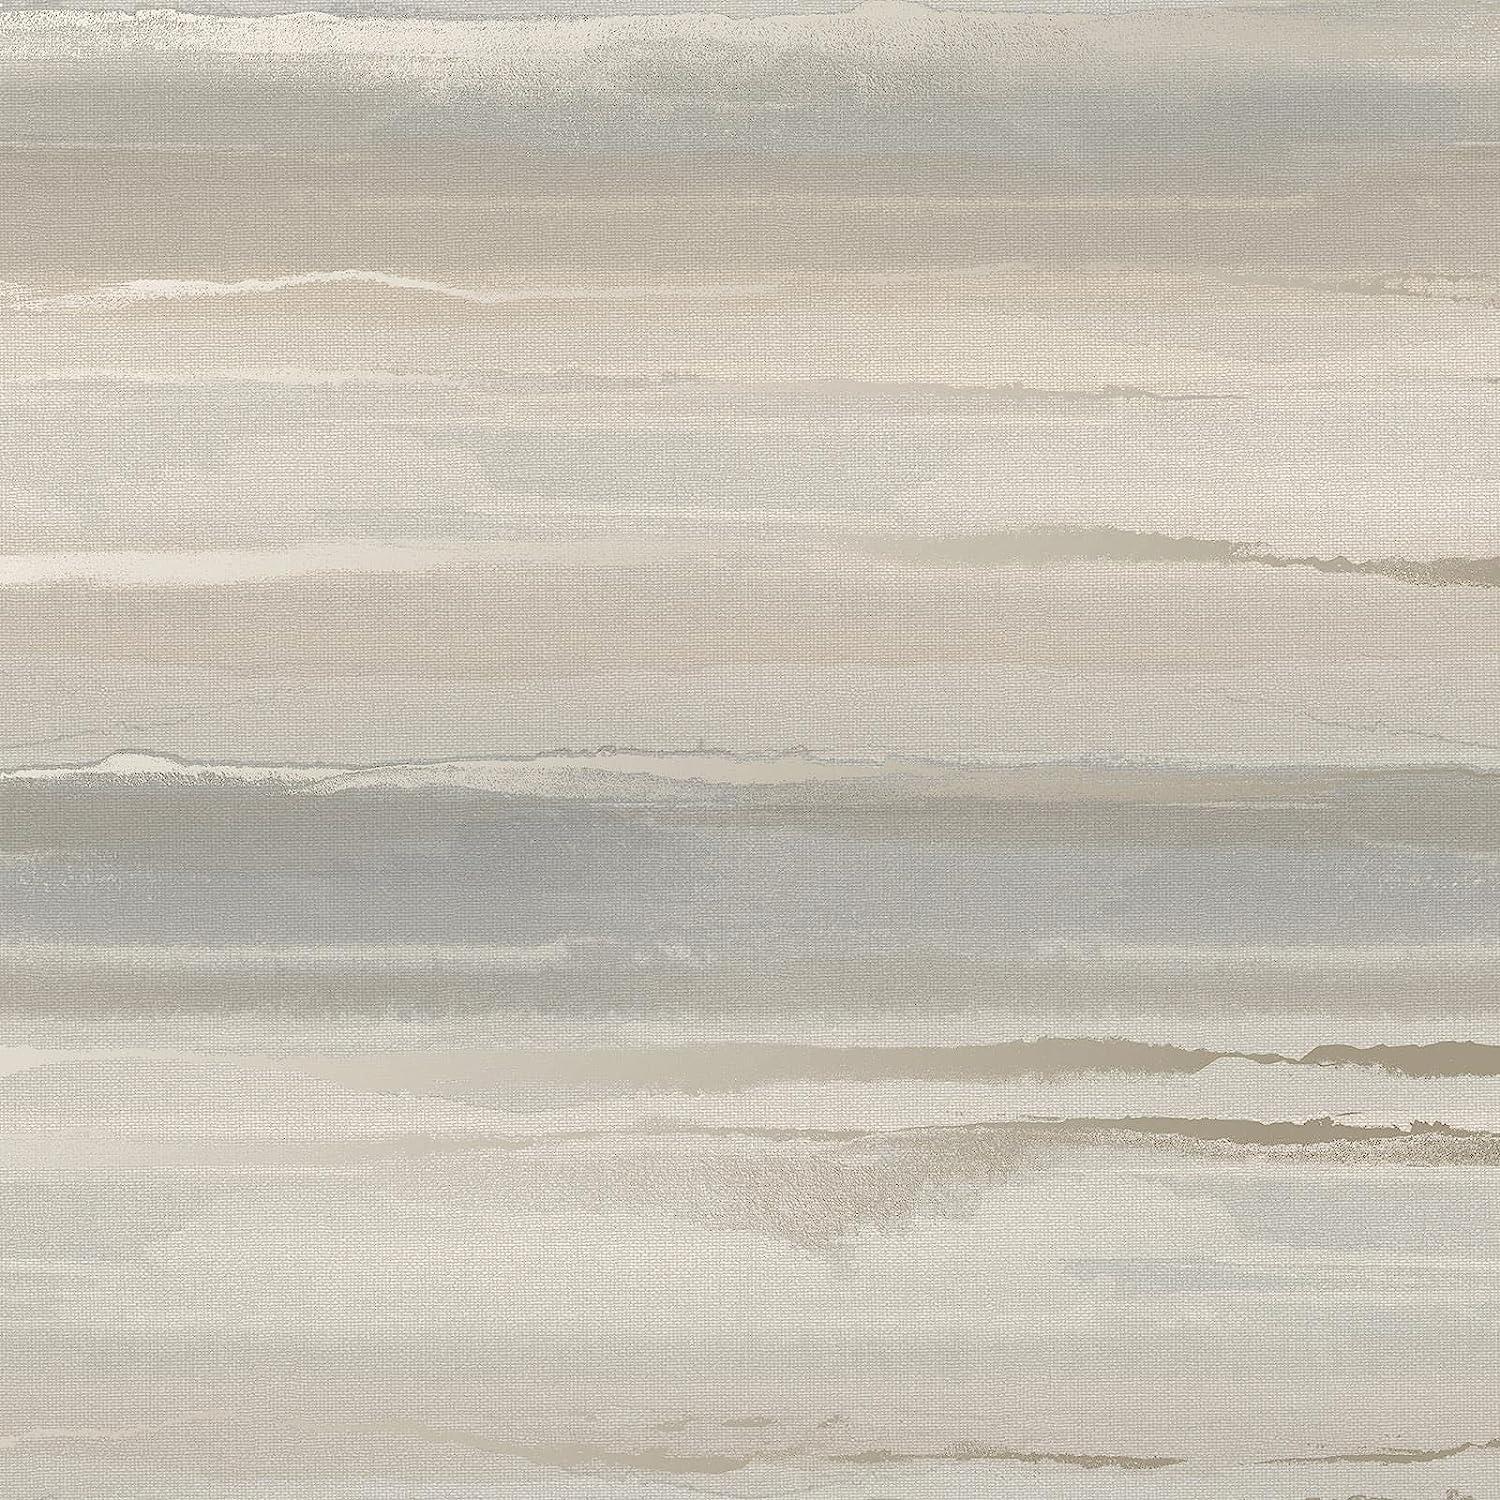 RASCH (U.K) Limited Horizon Wallpaper - Modern Wallpaper for Living Room, Bedroom, Fireplace - Decorative Luxury Wall Paper with Landscape Design & Natural Tones (Metallic Silver & Gold)